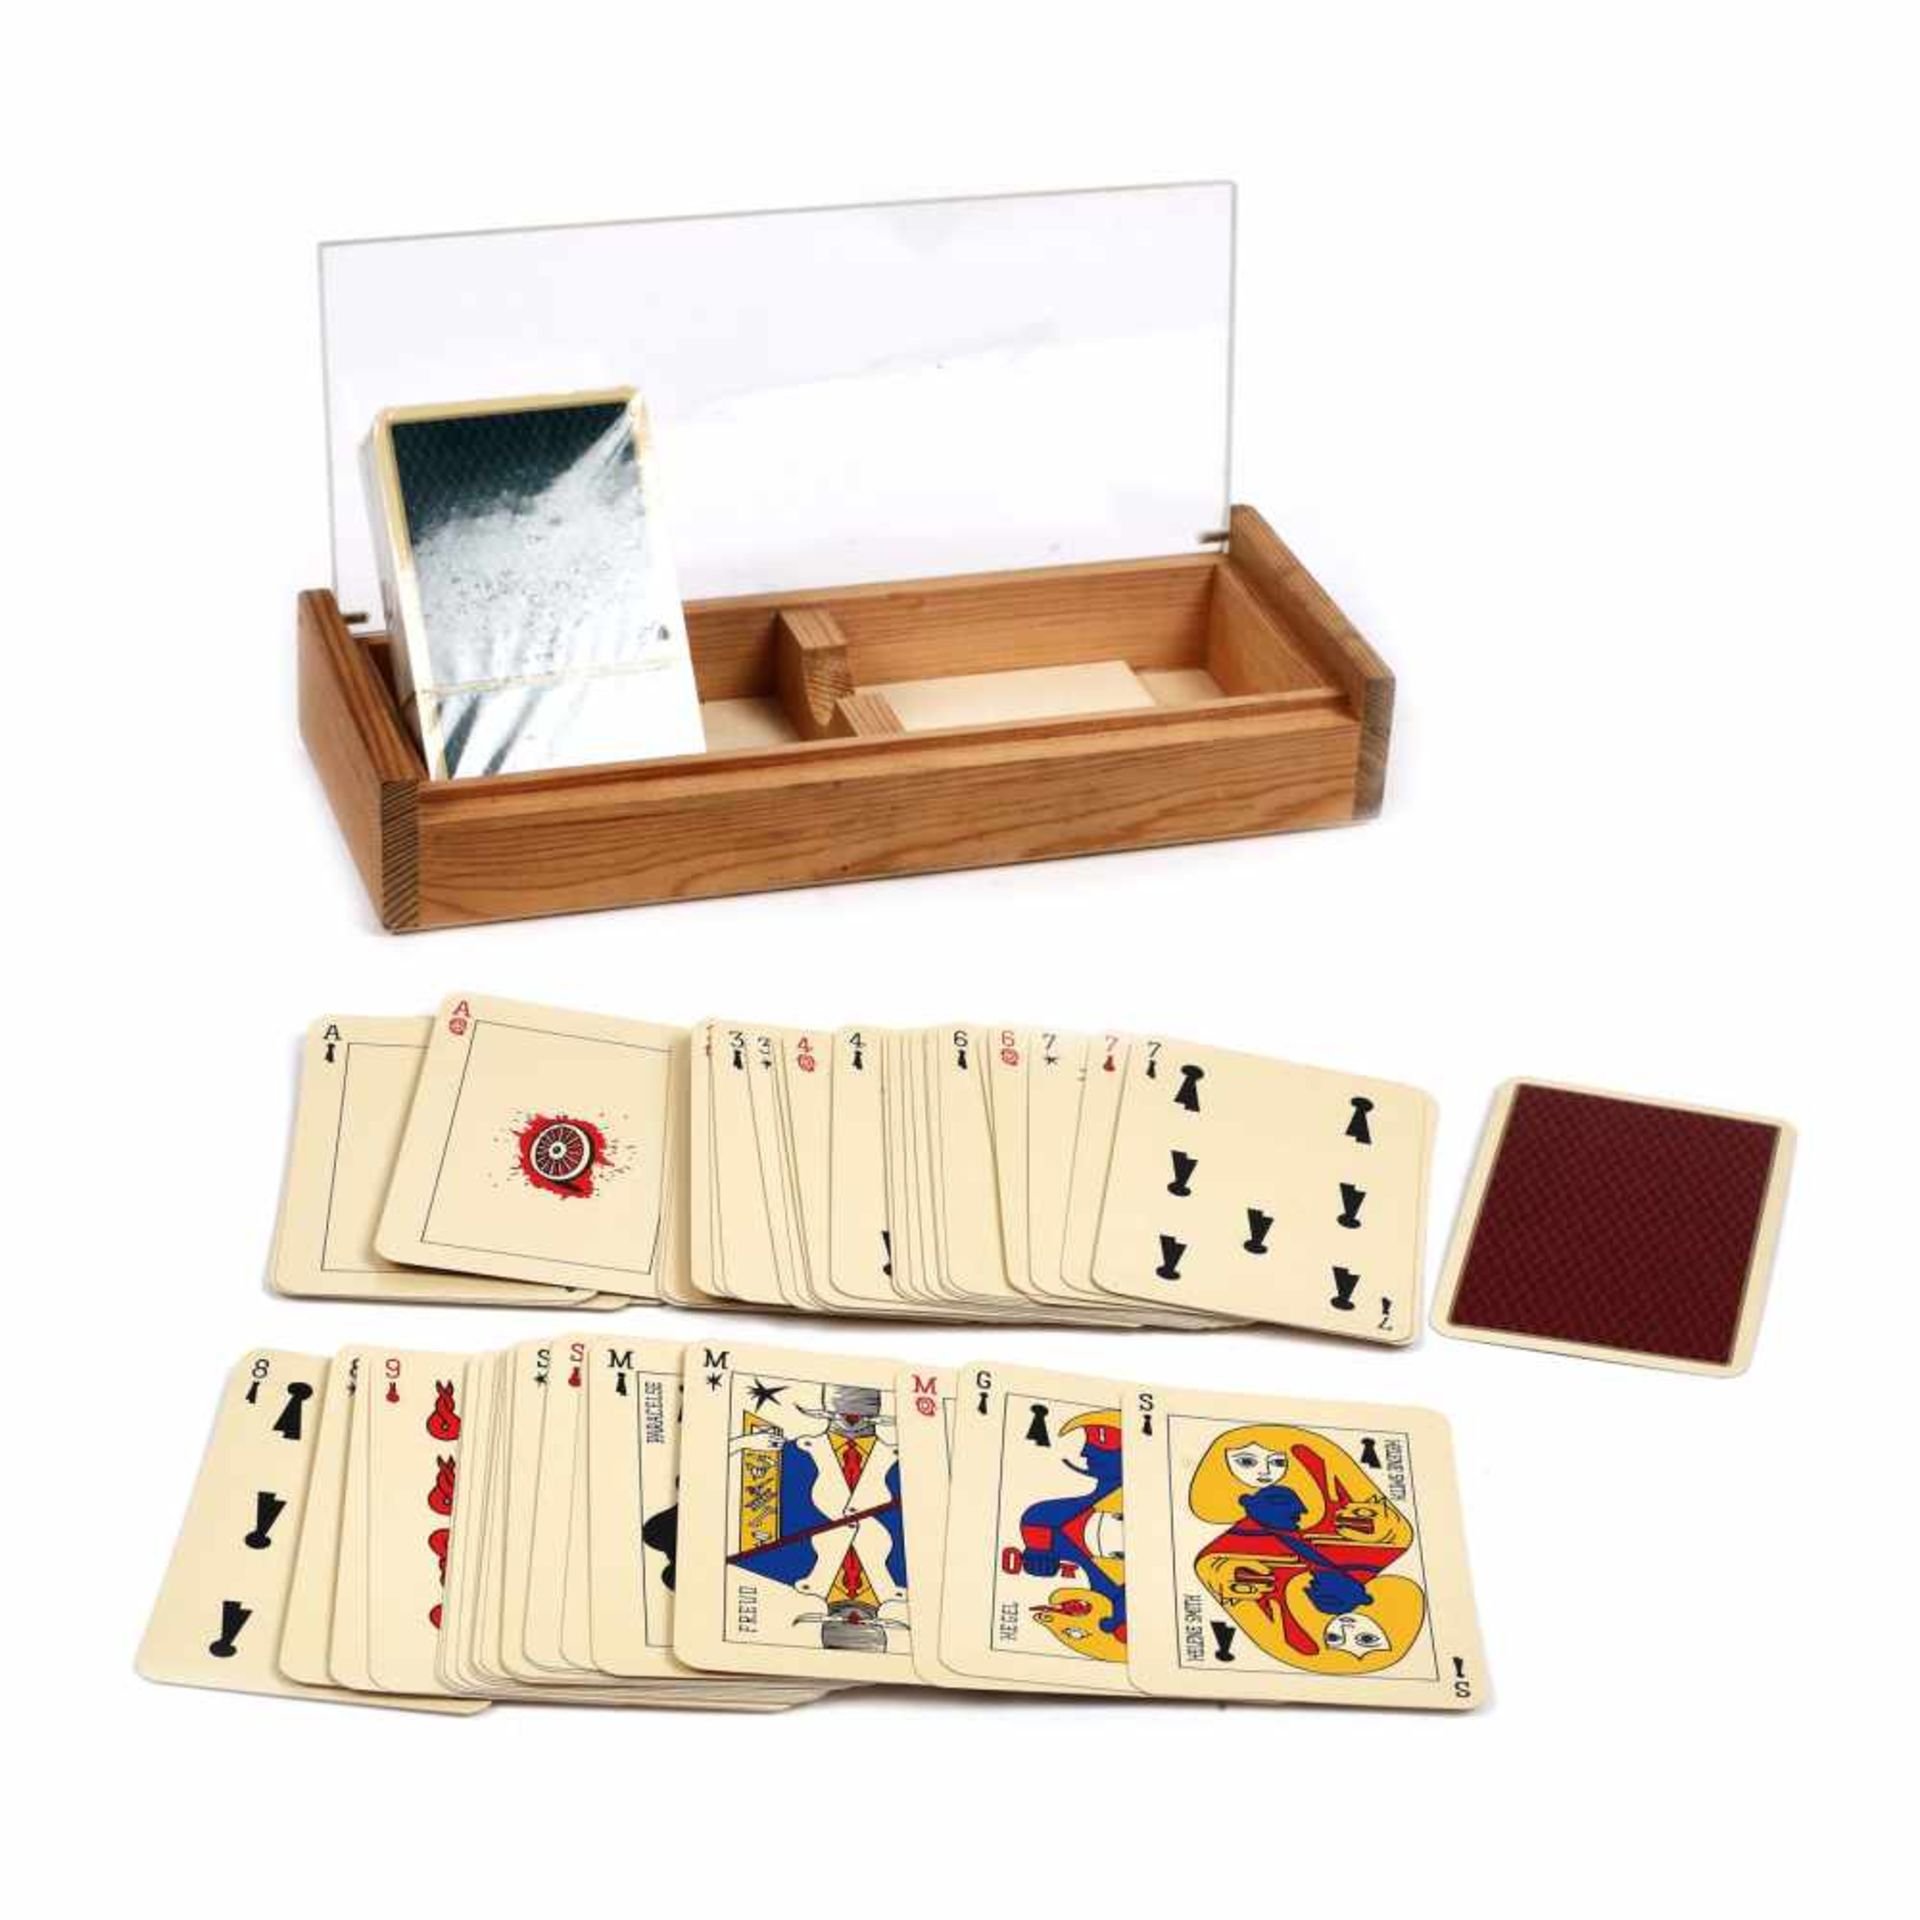 "Le Jeu de Marseille" - set of playing cards with artworks by Victor Brauner, André Breton, Oscar